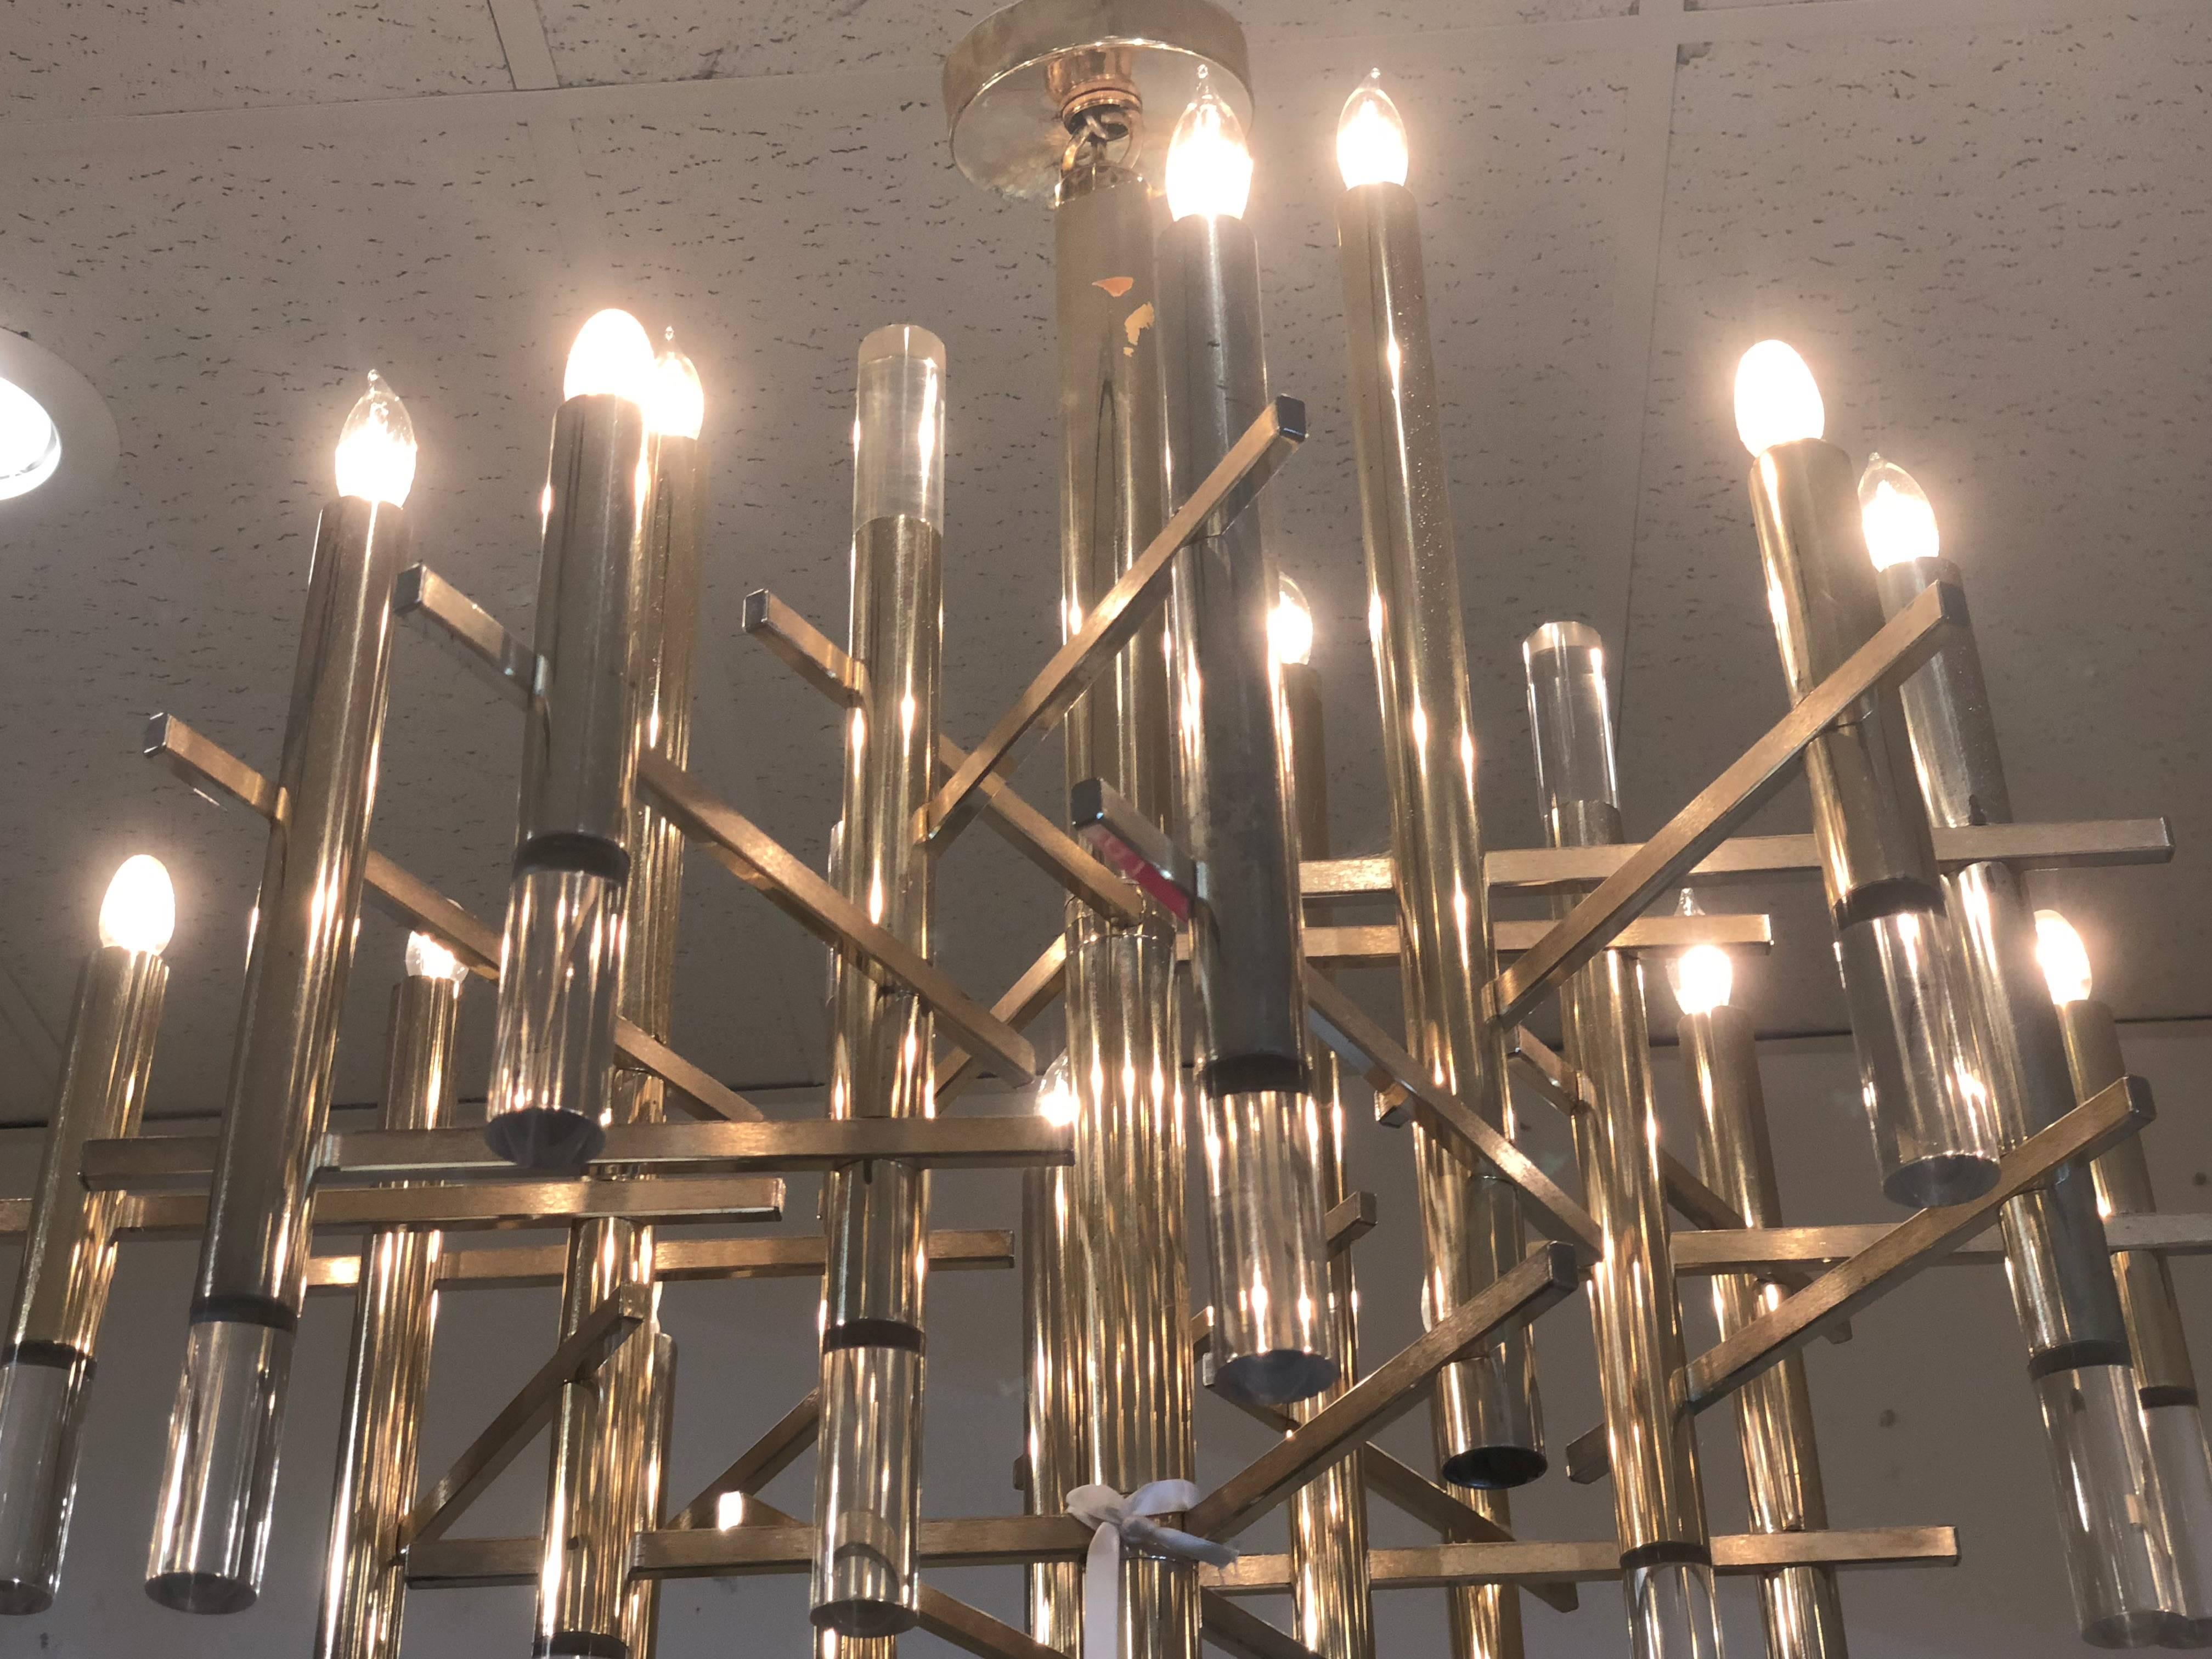 Fifteen-light Sciolari chandelier with brass accents. Minor pitting on brass finish with one Lucite rod missing.

Dimensions: 23